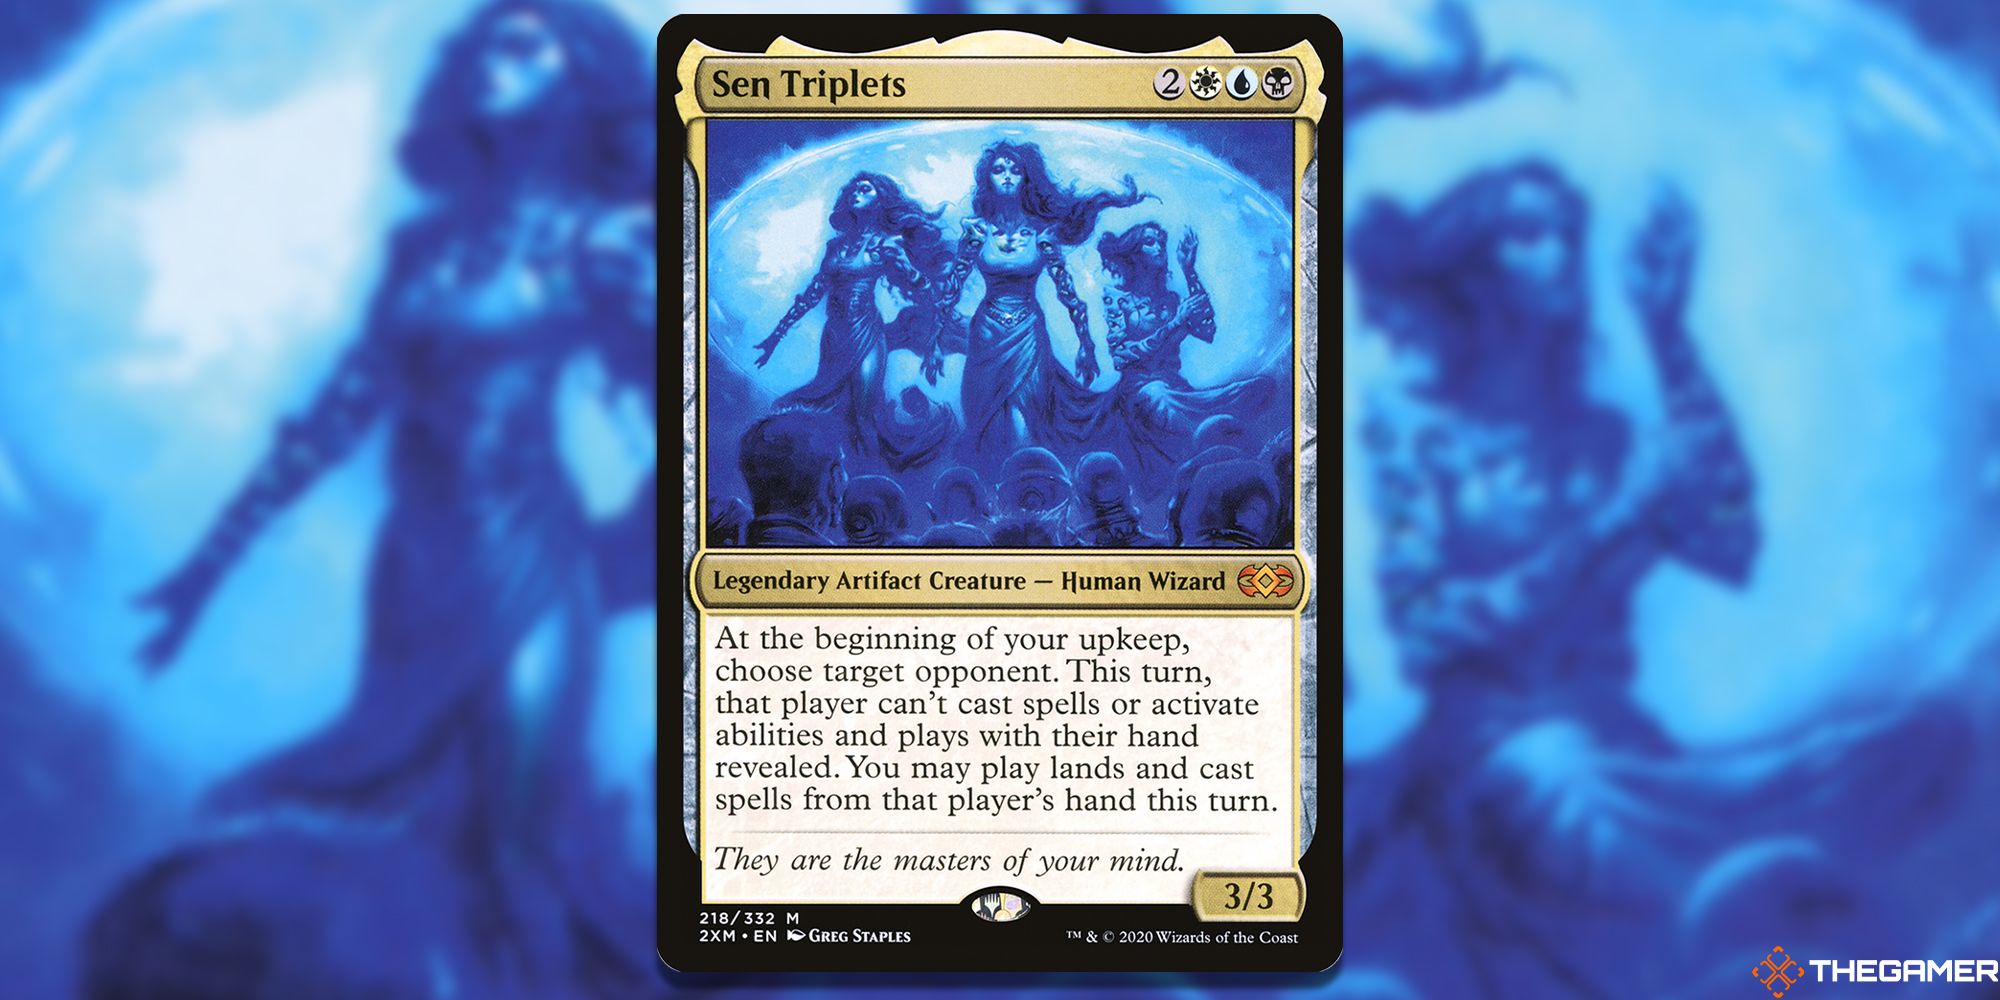 Image of the Sen Triplets card in Magic: The Gathering, with art by Greg Staples